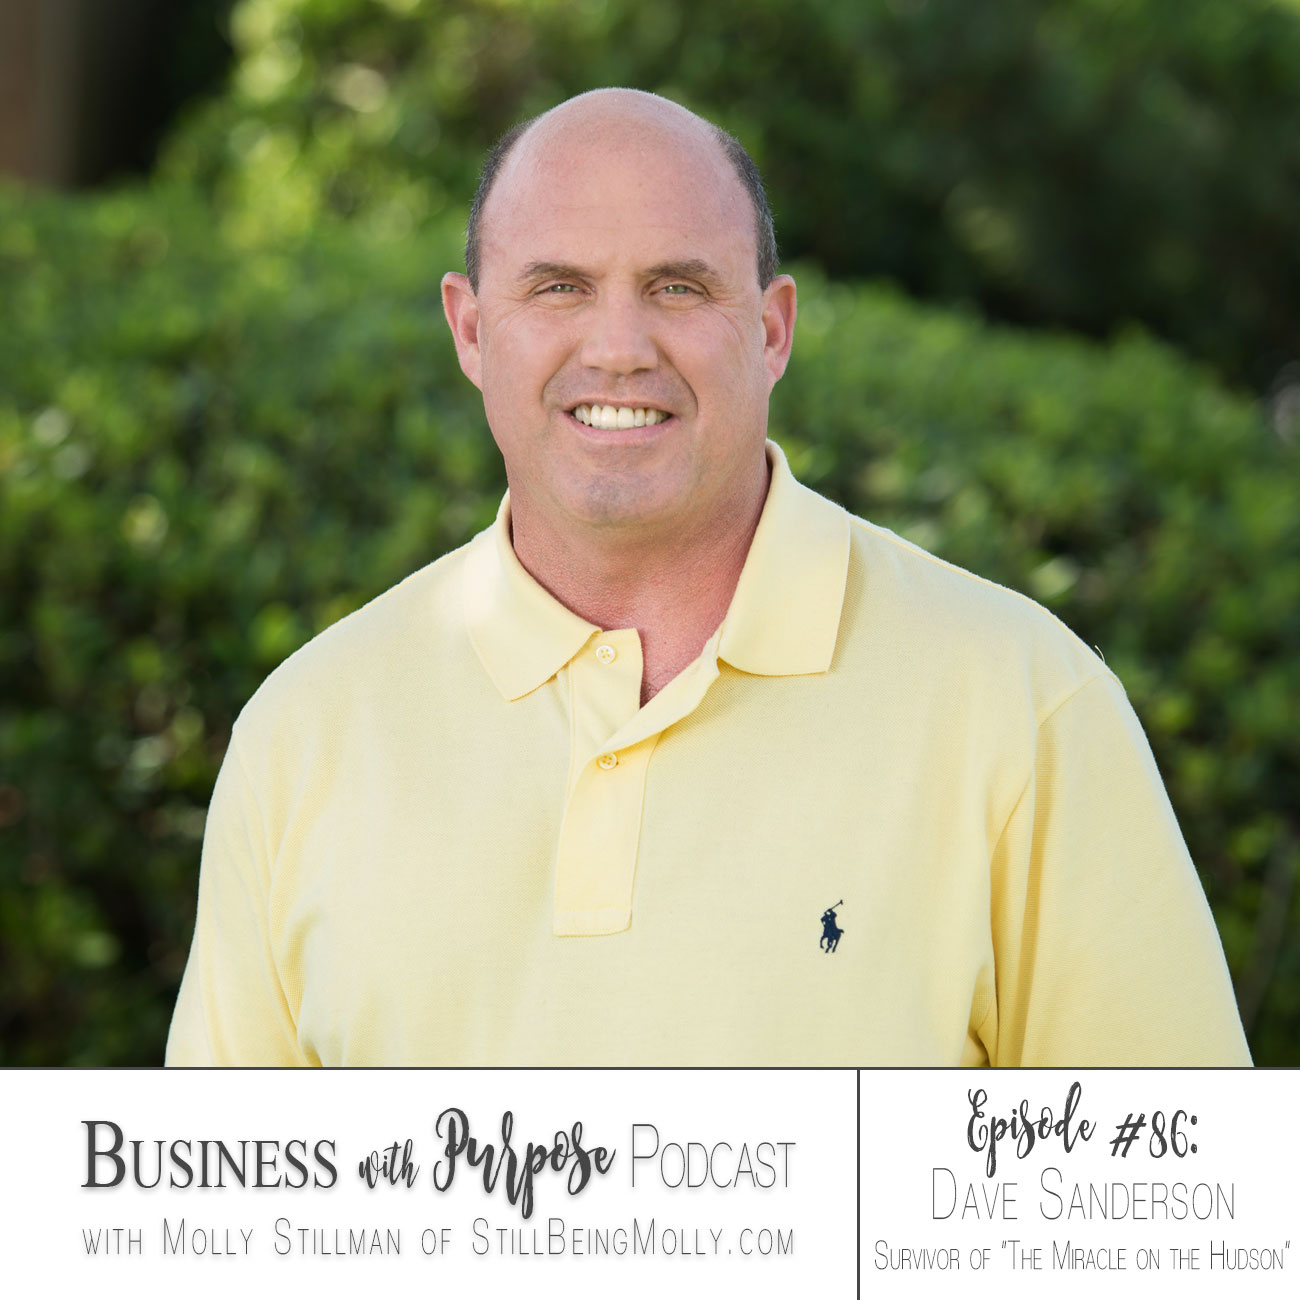 Business with Purpose Podcast EP 86: Dave Sanderson, Survivor of "The Miracle on the Hudson" by popular North Carolina blogger and podcaster, Still Being Molly